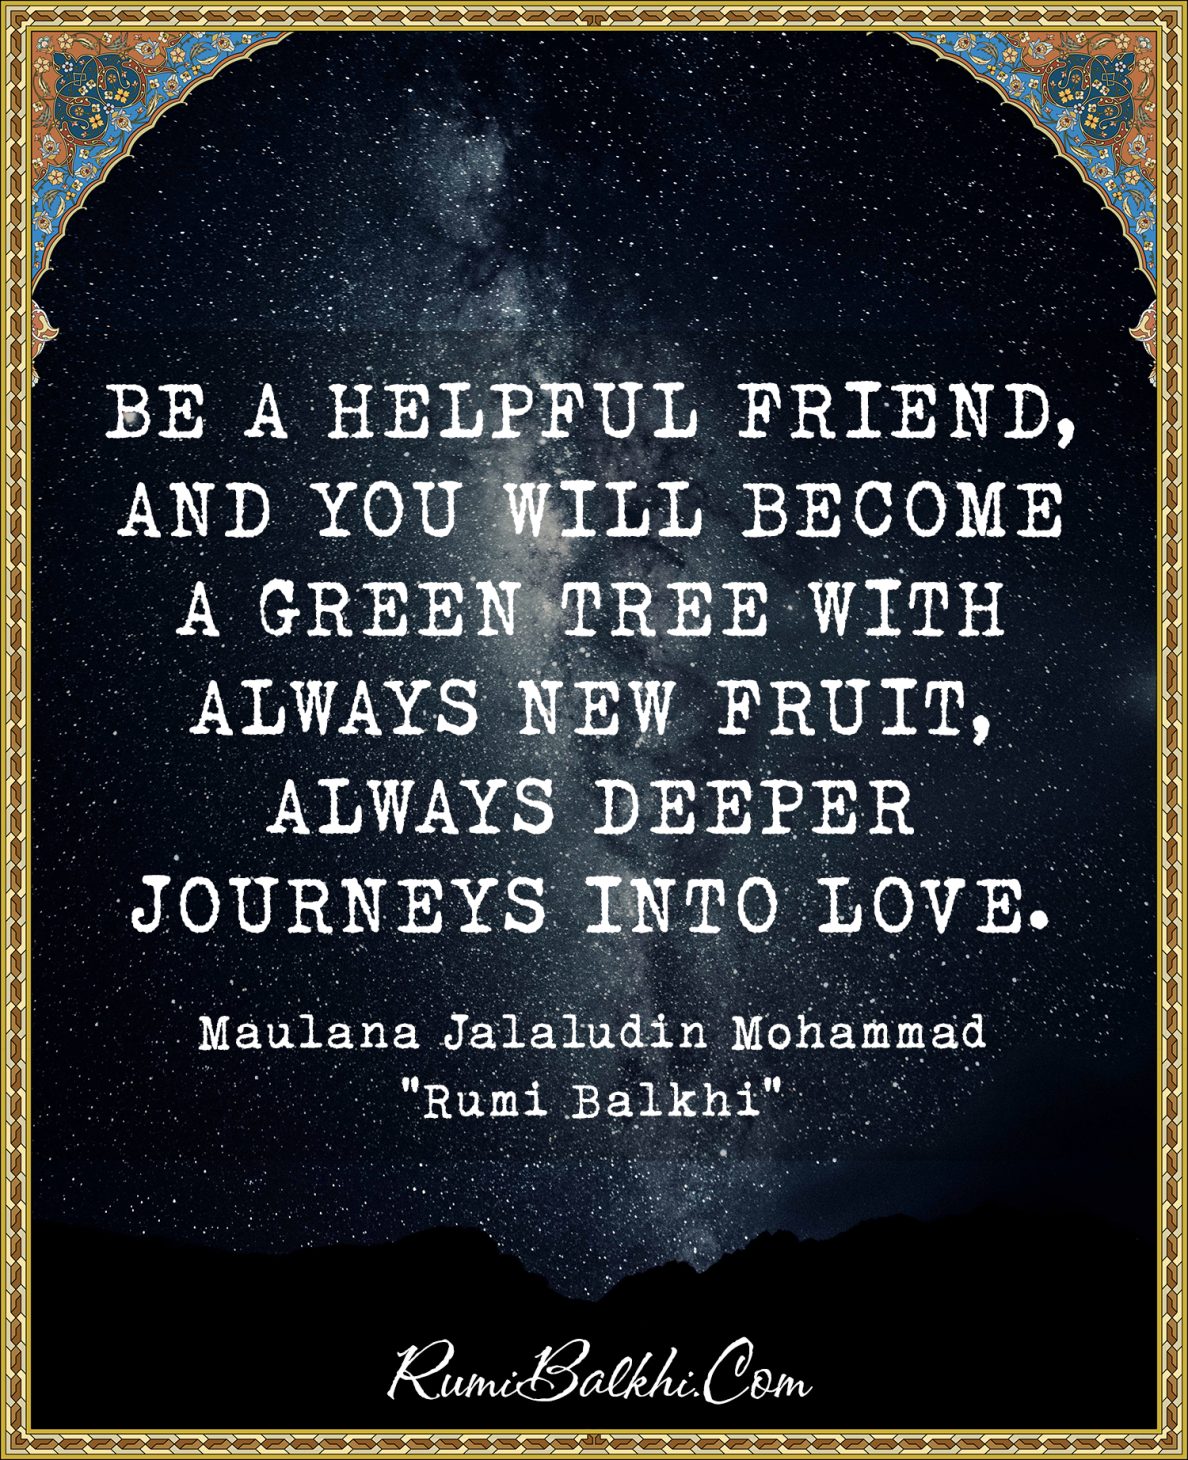 Be a helpful friend, and you will become a green tree with always new fruit, always deeper journeys into love